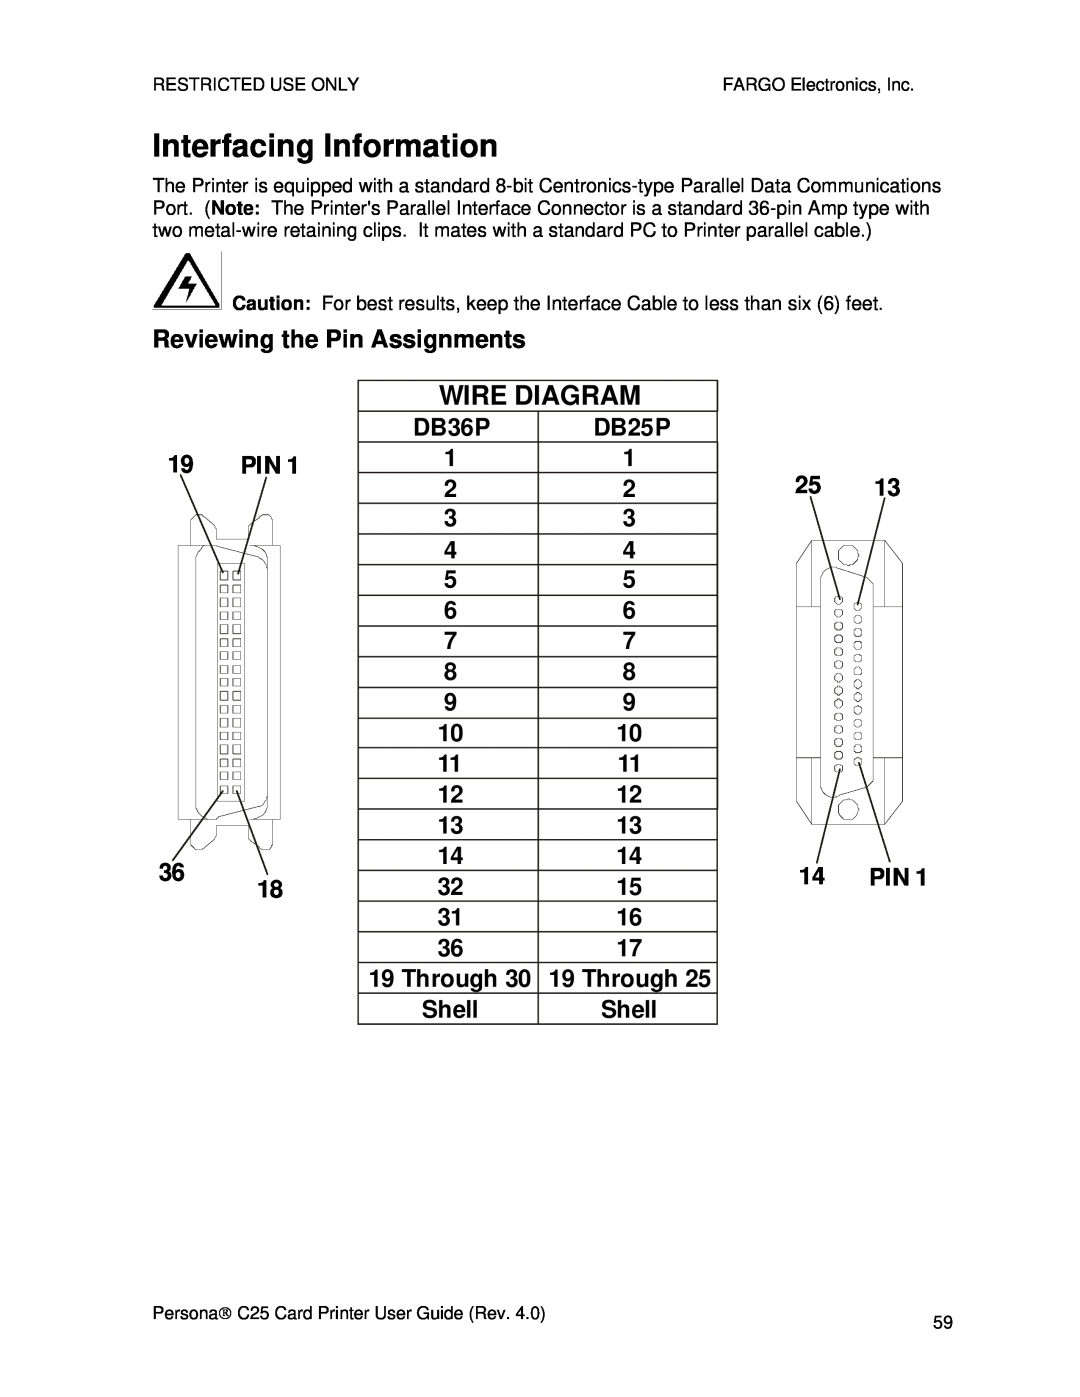 FARGO electronic S000256 manual Interfacing Information, Reviewing the Pin Assignments, Wire Diagram, DB36P, DB25P, Through 